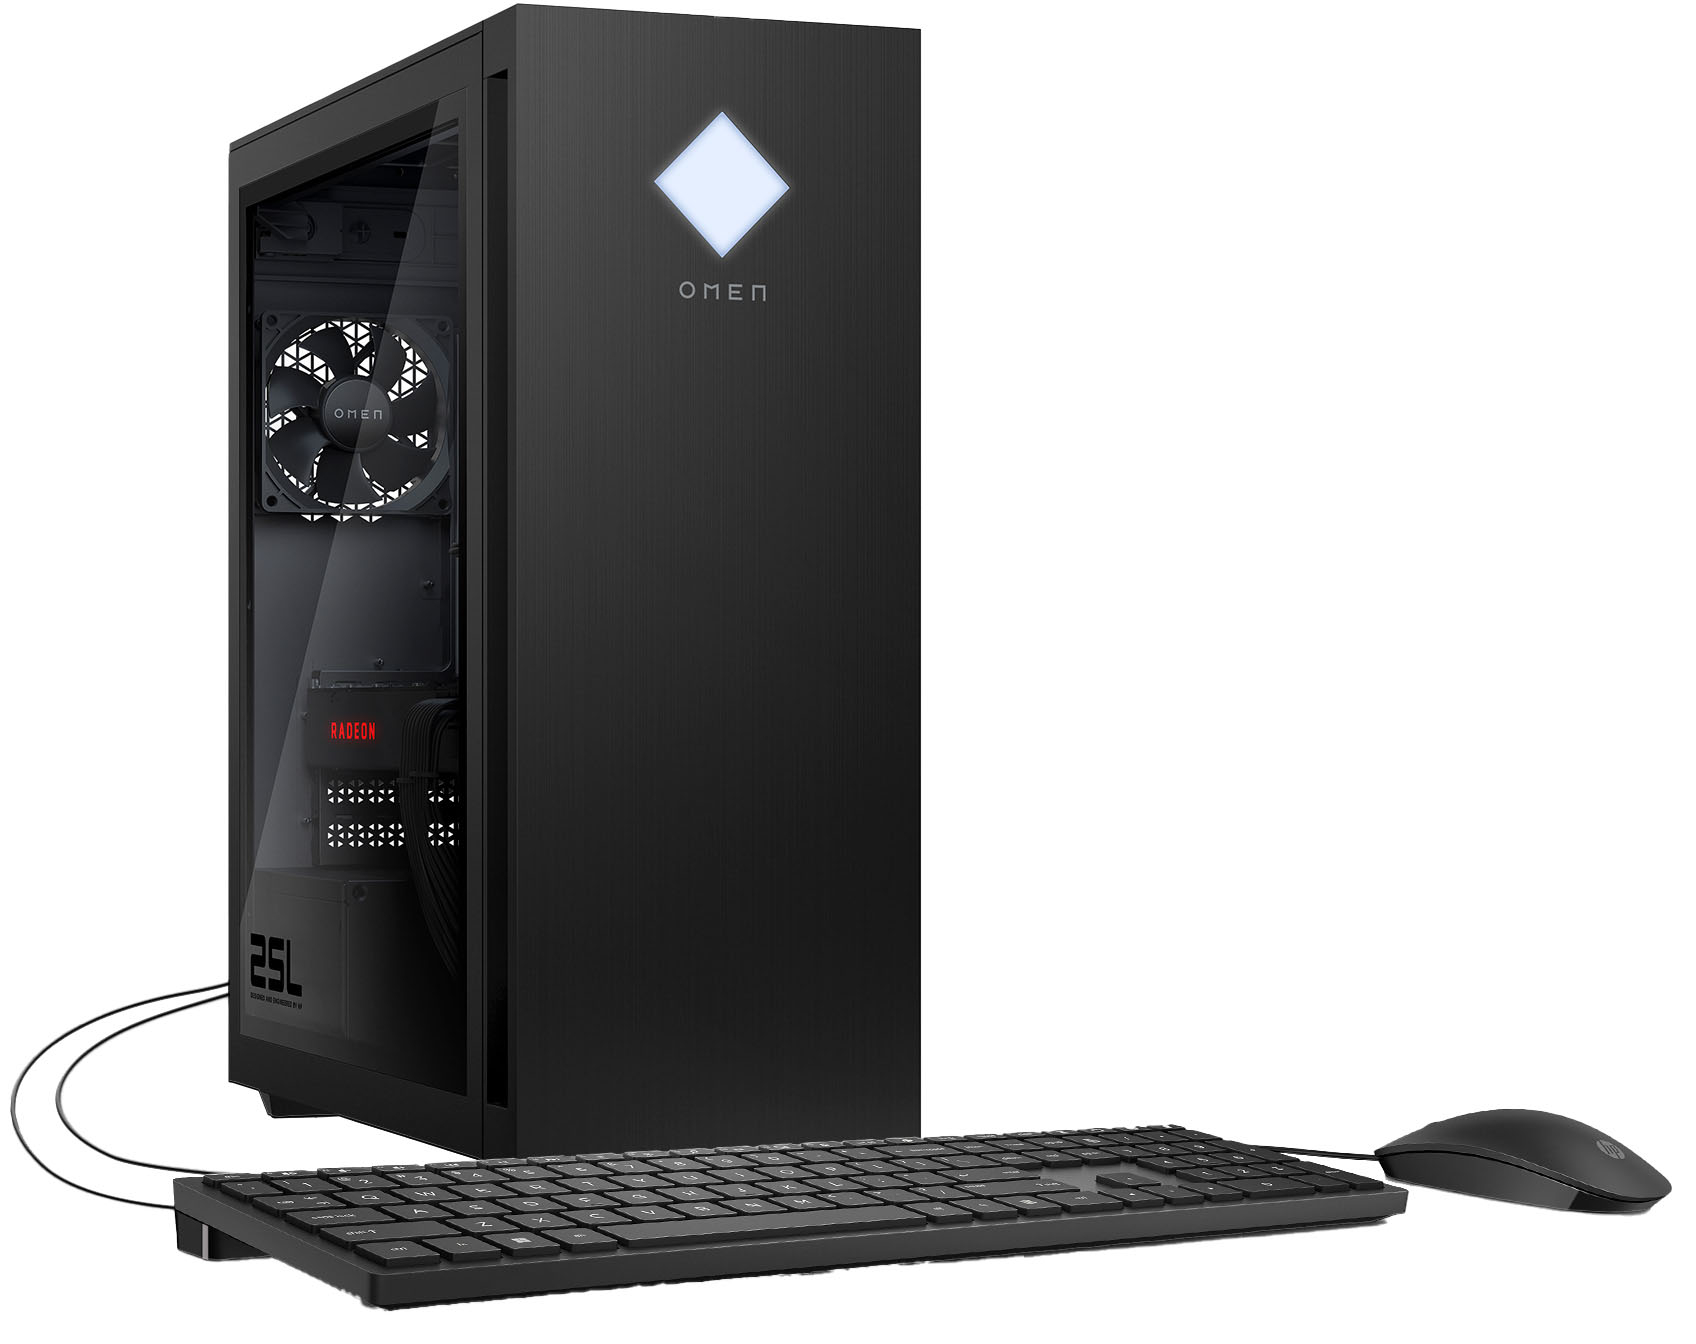 Clx Set Amd Ryzen 7 5700x 16gb Ram Rx 7600 1tb Nvme M.2 Ssd+2tb Hdd Gaming  Desktop, Towers Only, Electronics